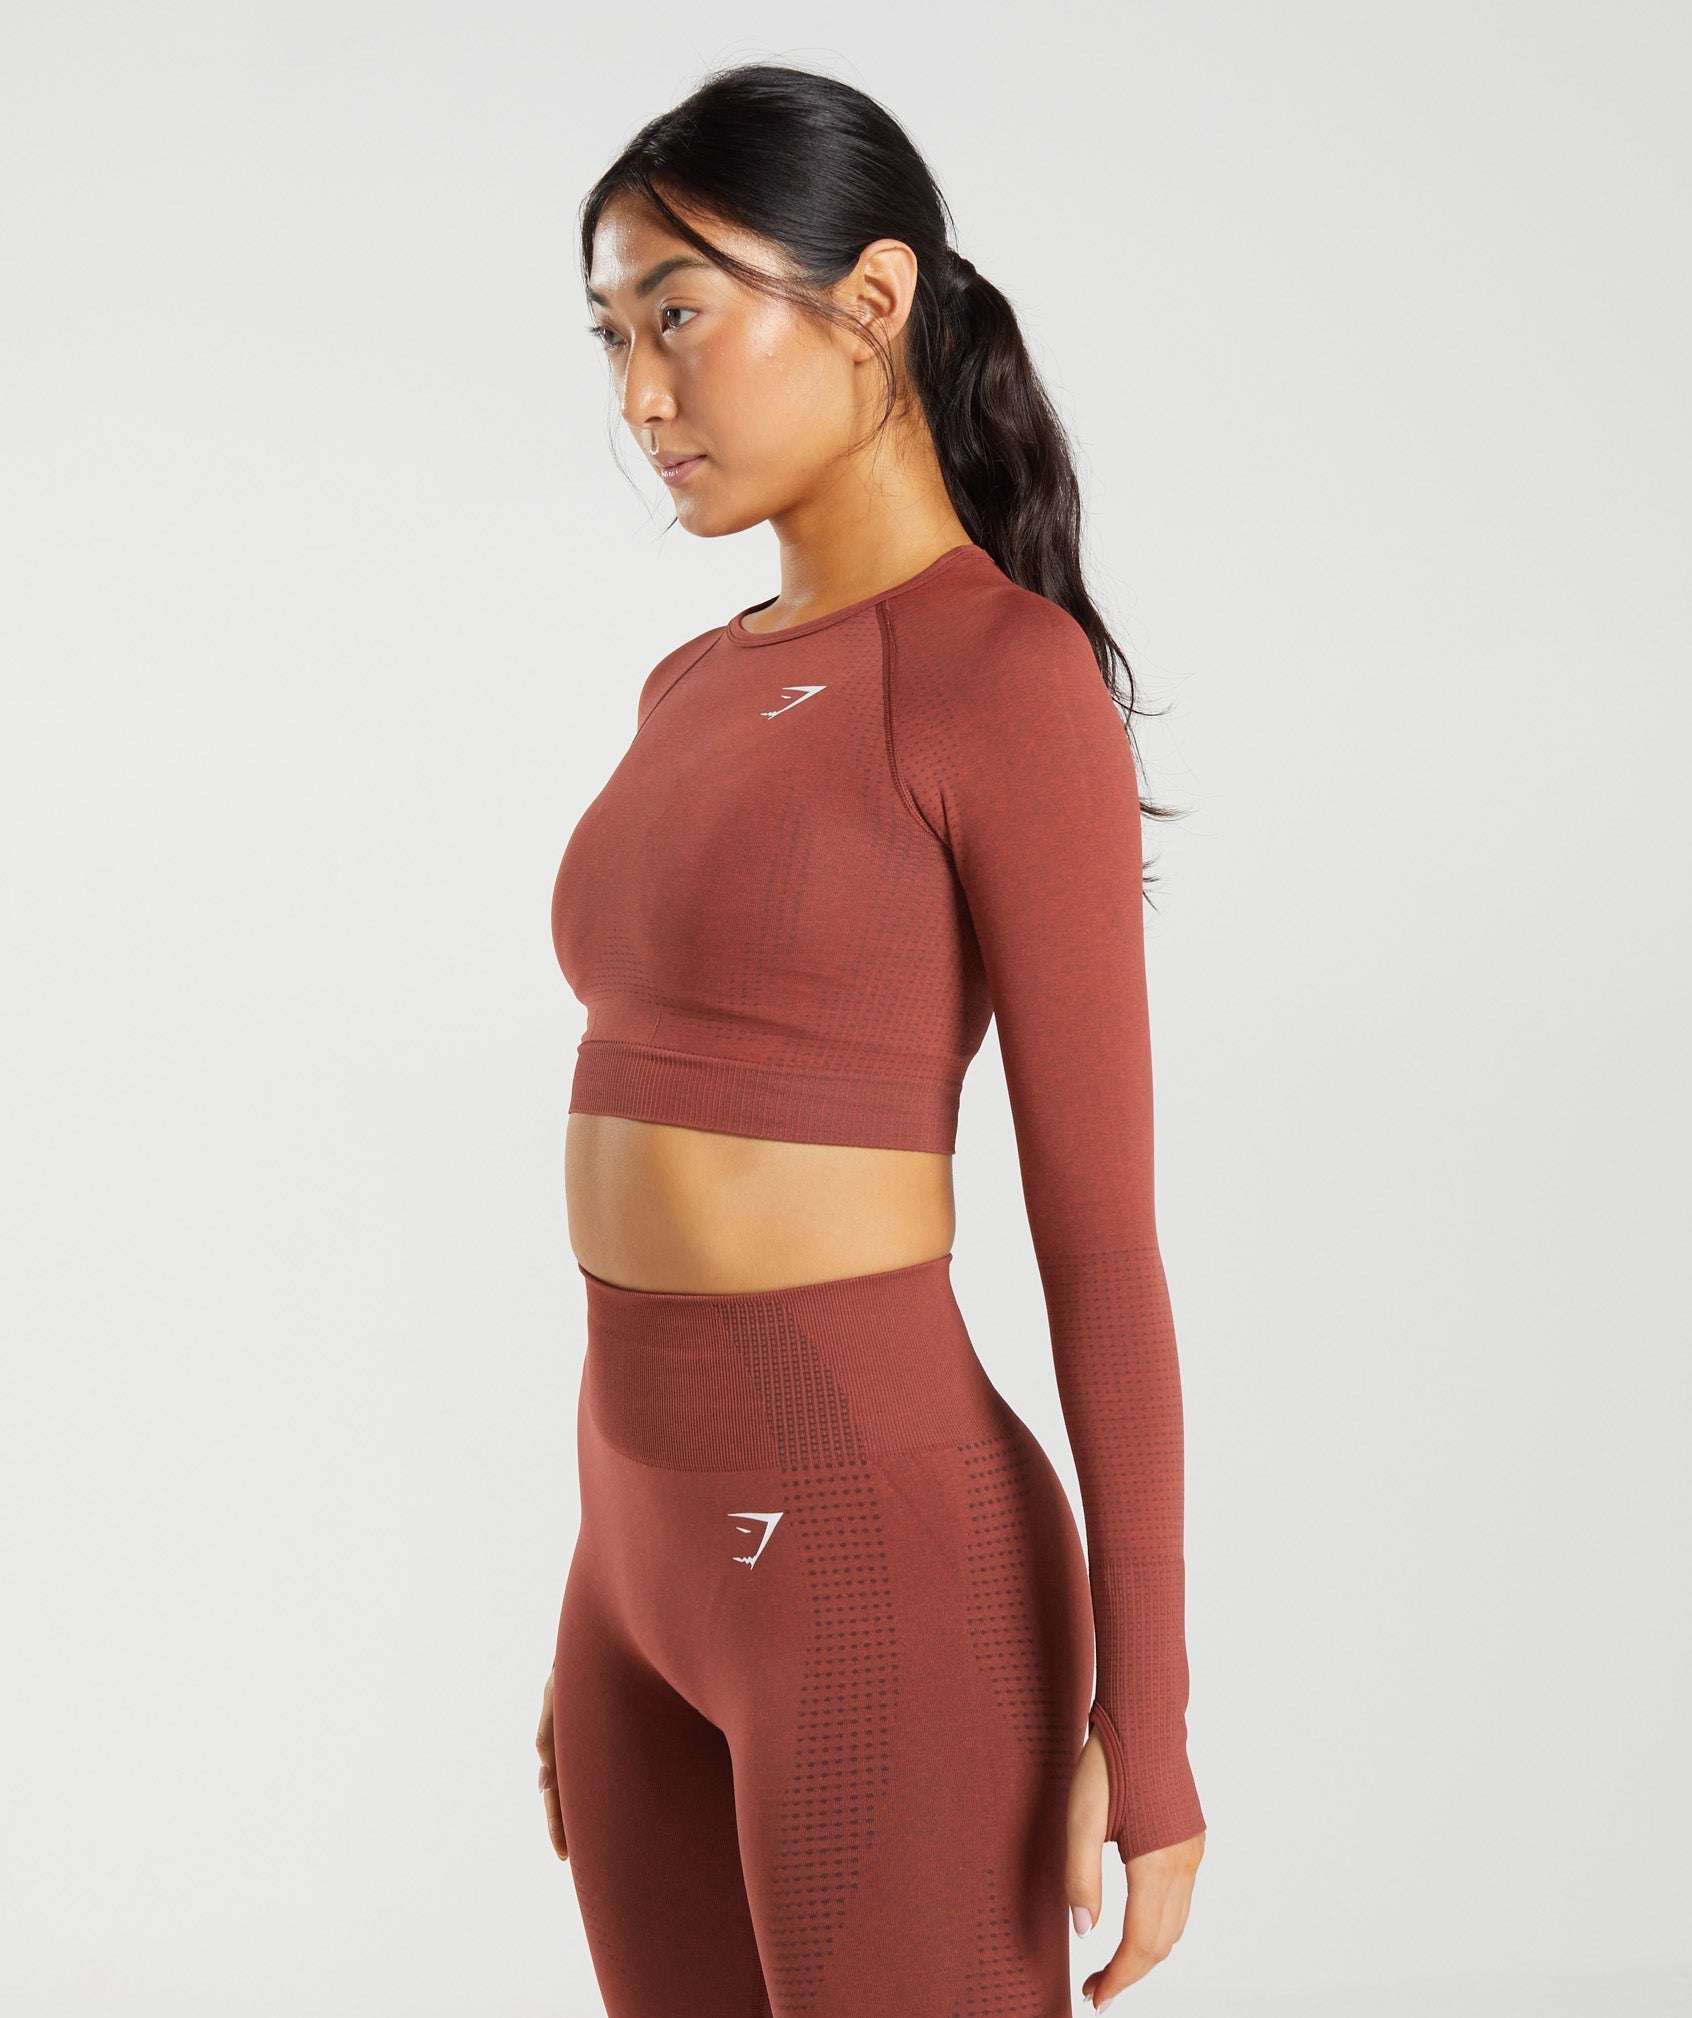 Gymshark VITAL SEAMLESS 2.0 CROP TOP Is Your New Must Have